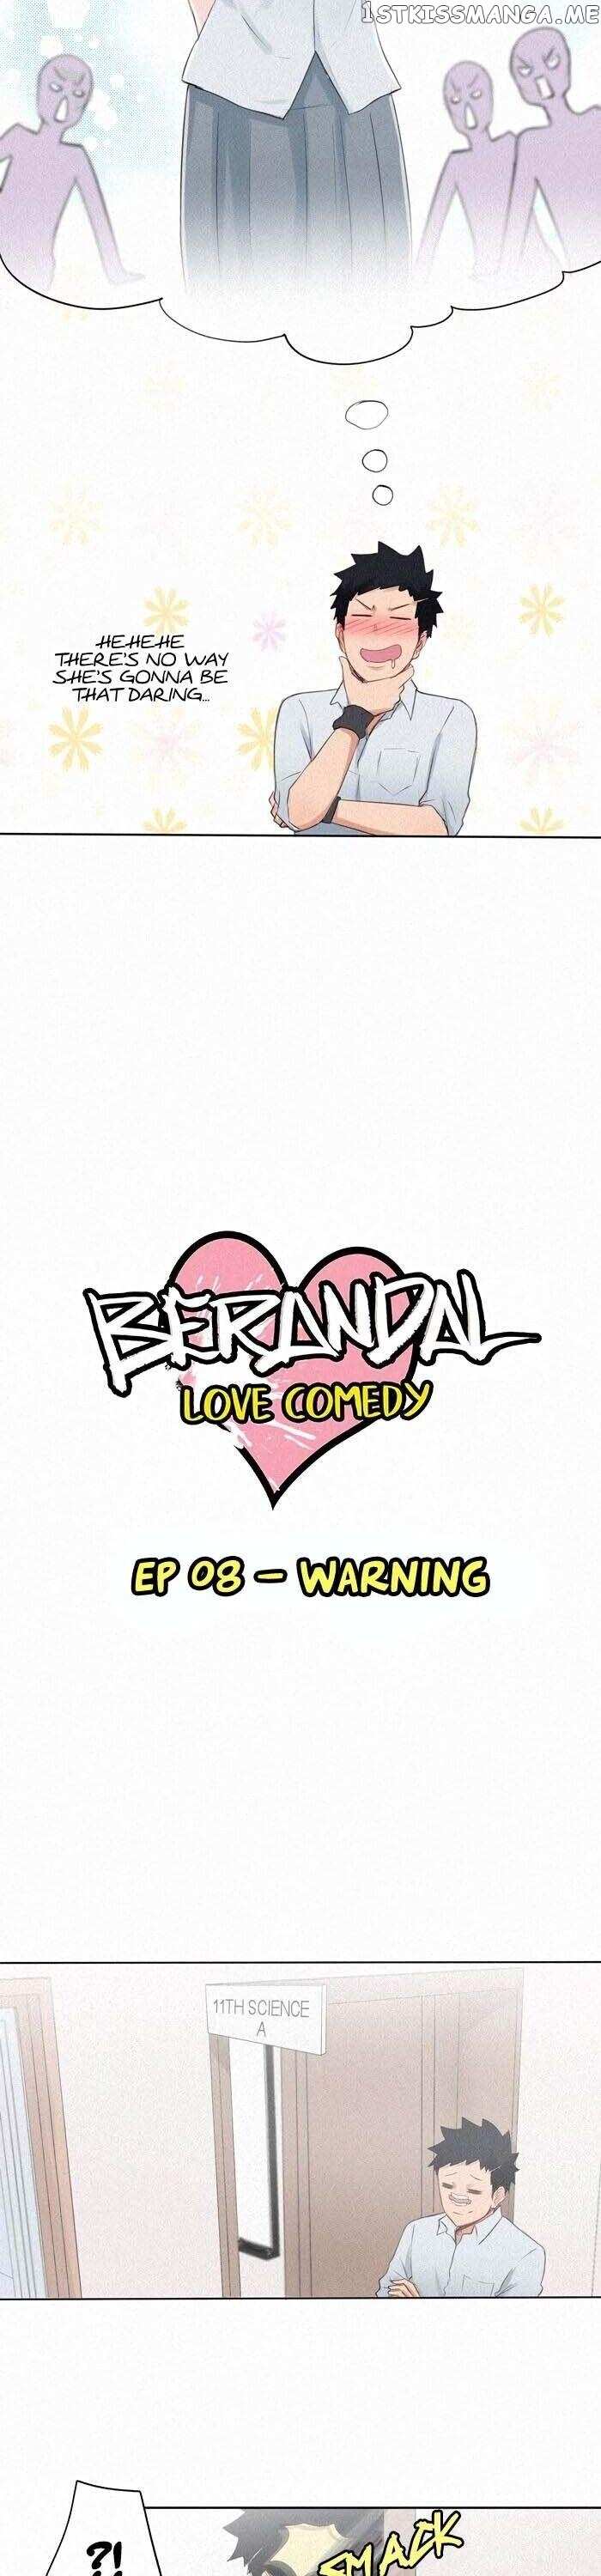 Berandal Love Comedy chapter 8 - page 3